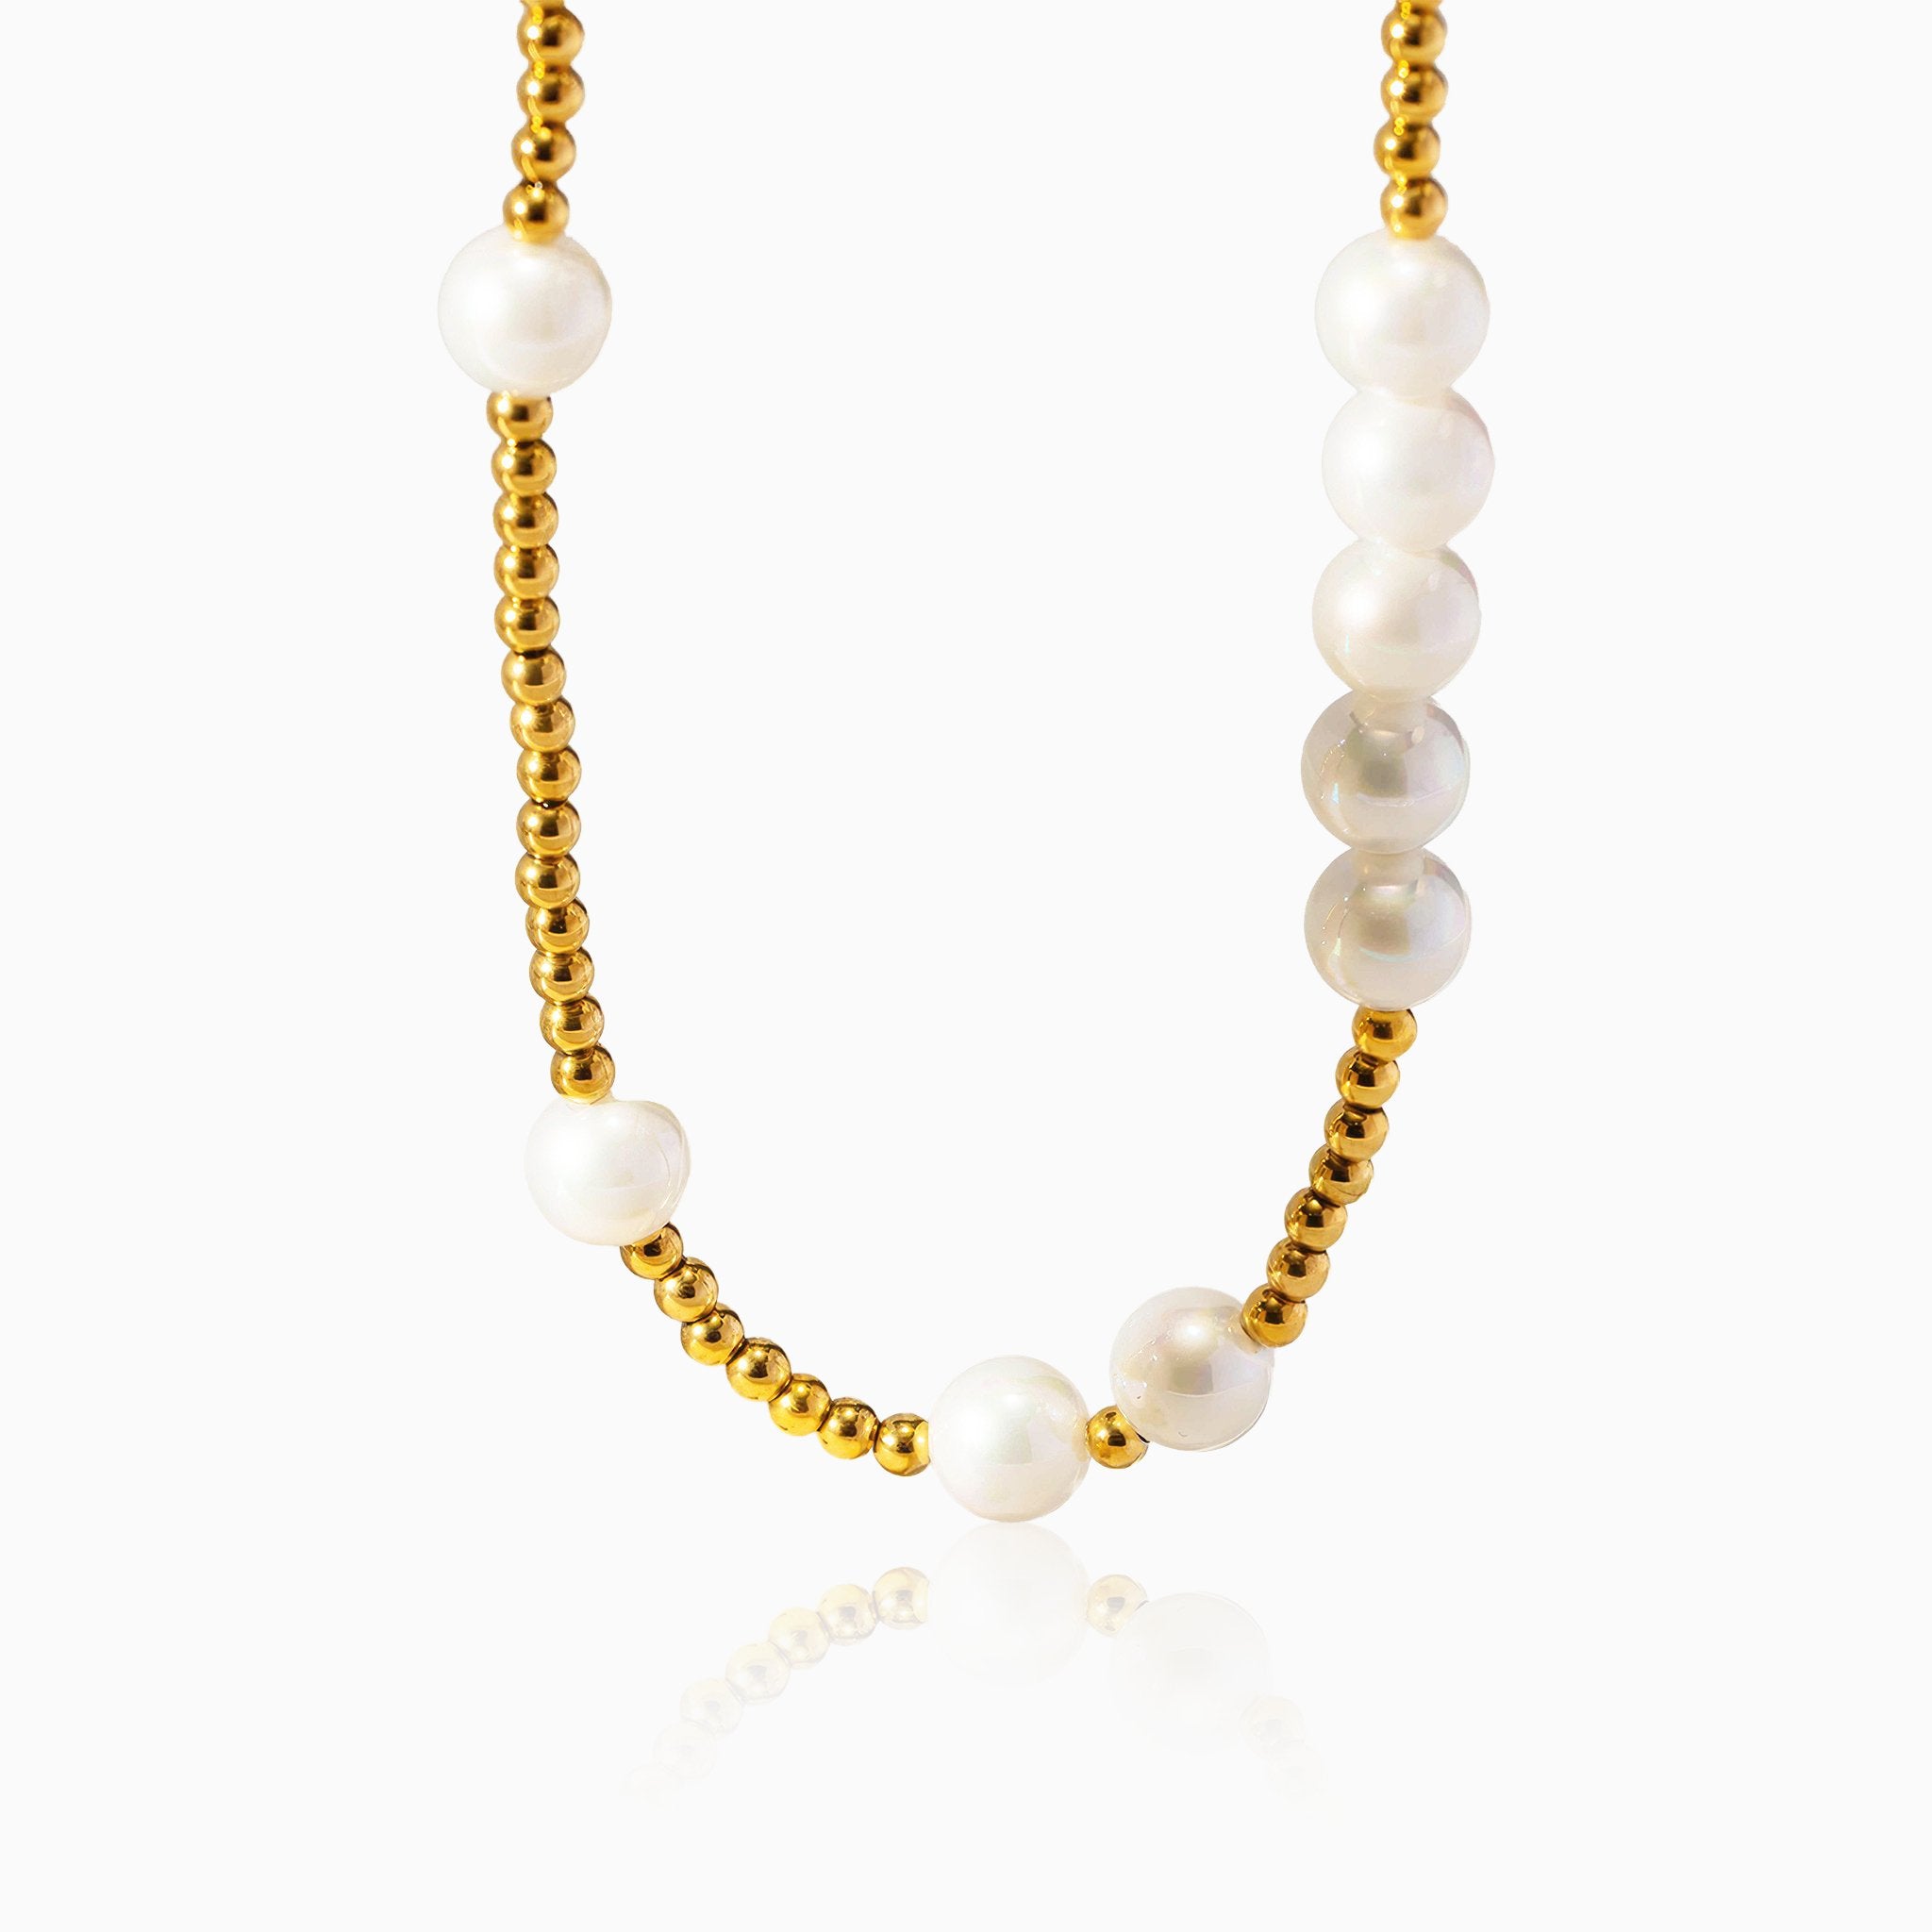 Dazzling Pearl Pendant Necklace - Nobbier - Necklace - 18K Gold And Titanium PVD Coated Jewelry